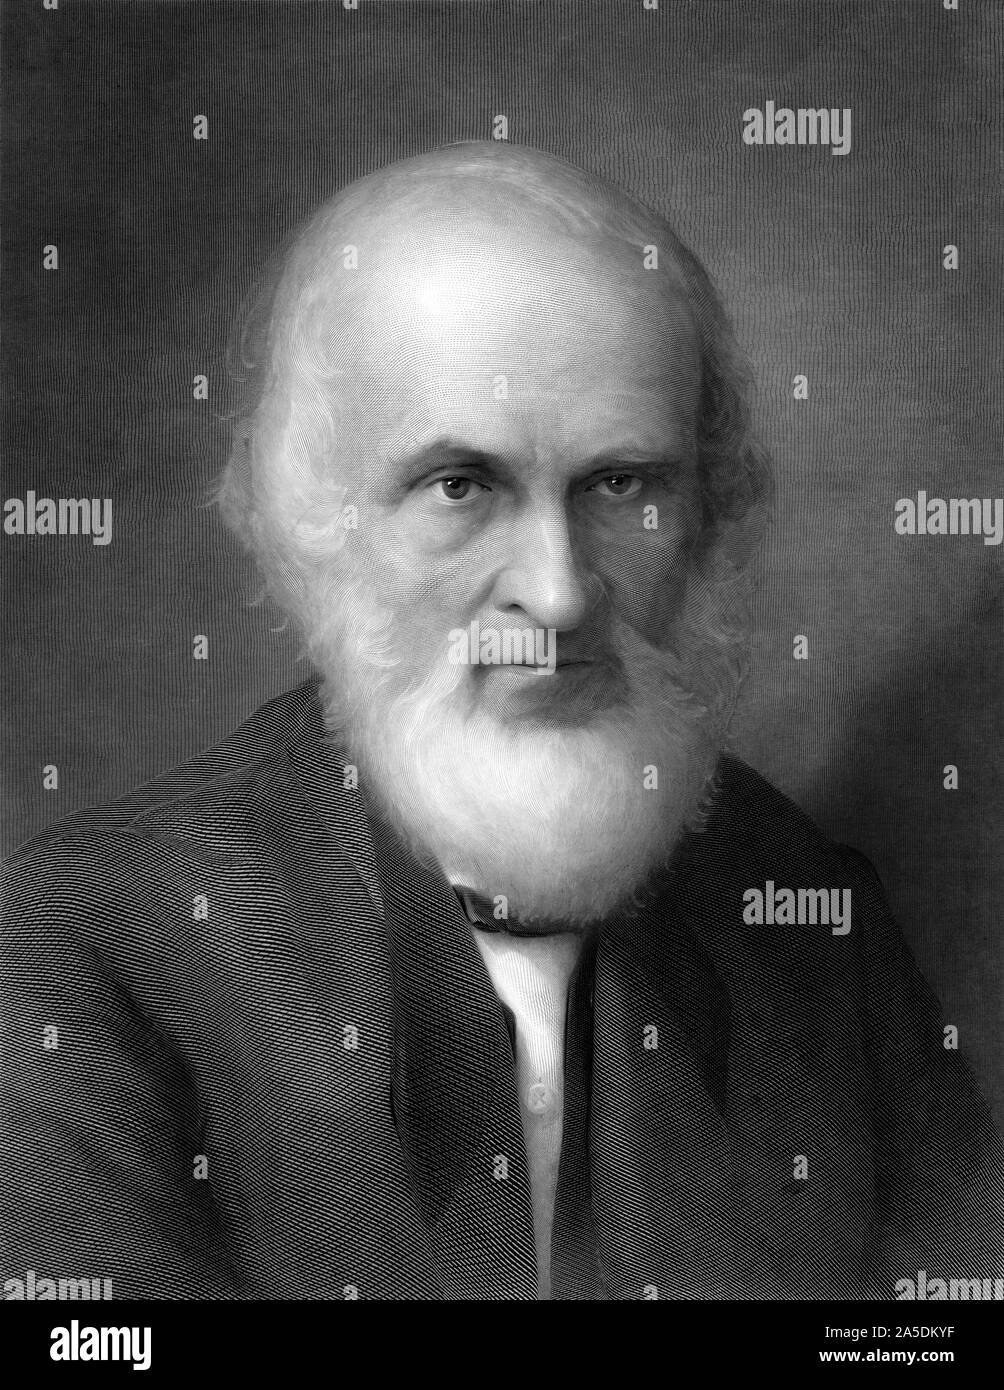 Vintage portrait of American Quaker poet and advocate of the abolition of slavery John Greenleaf Whittier (1807 – 1892). Print circa 1890s. Stock Photo